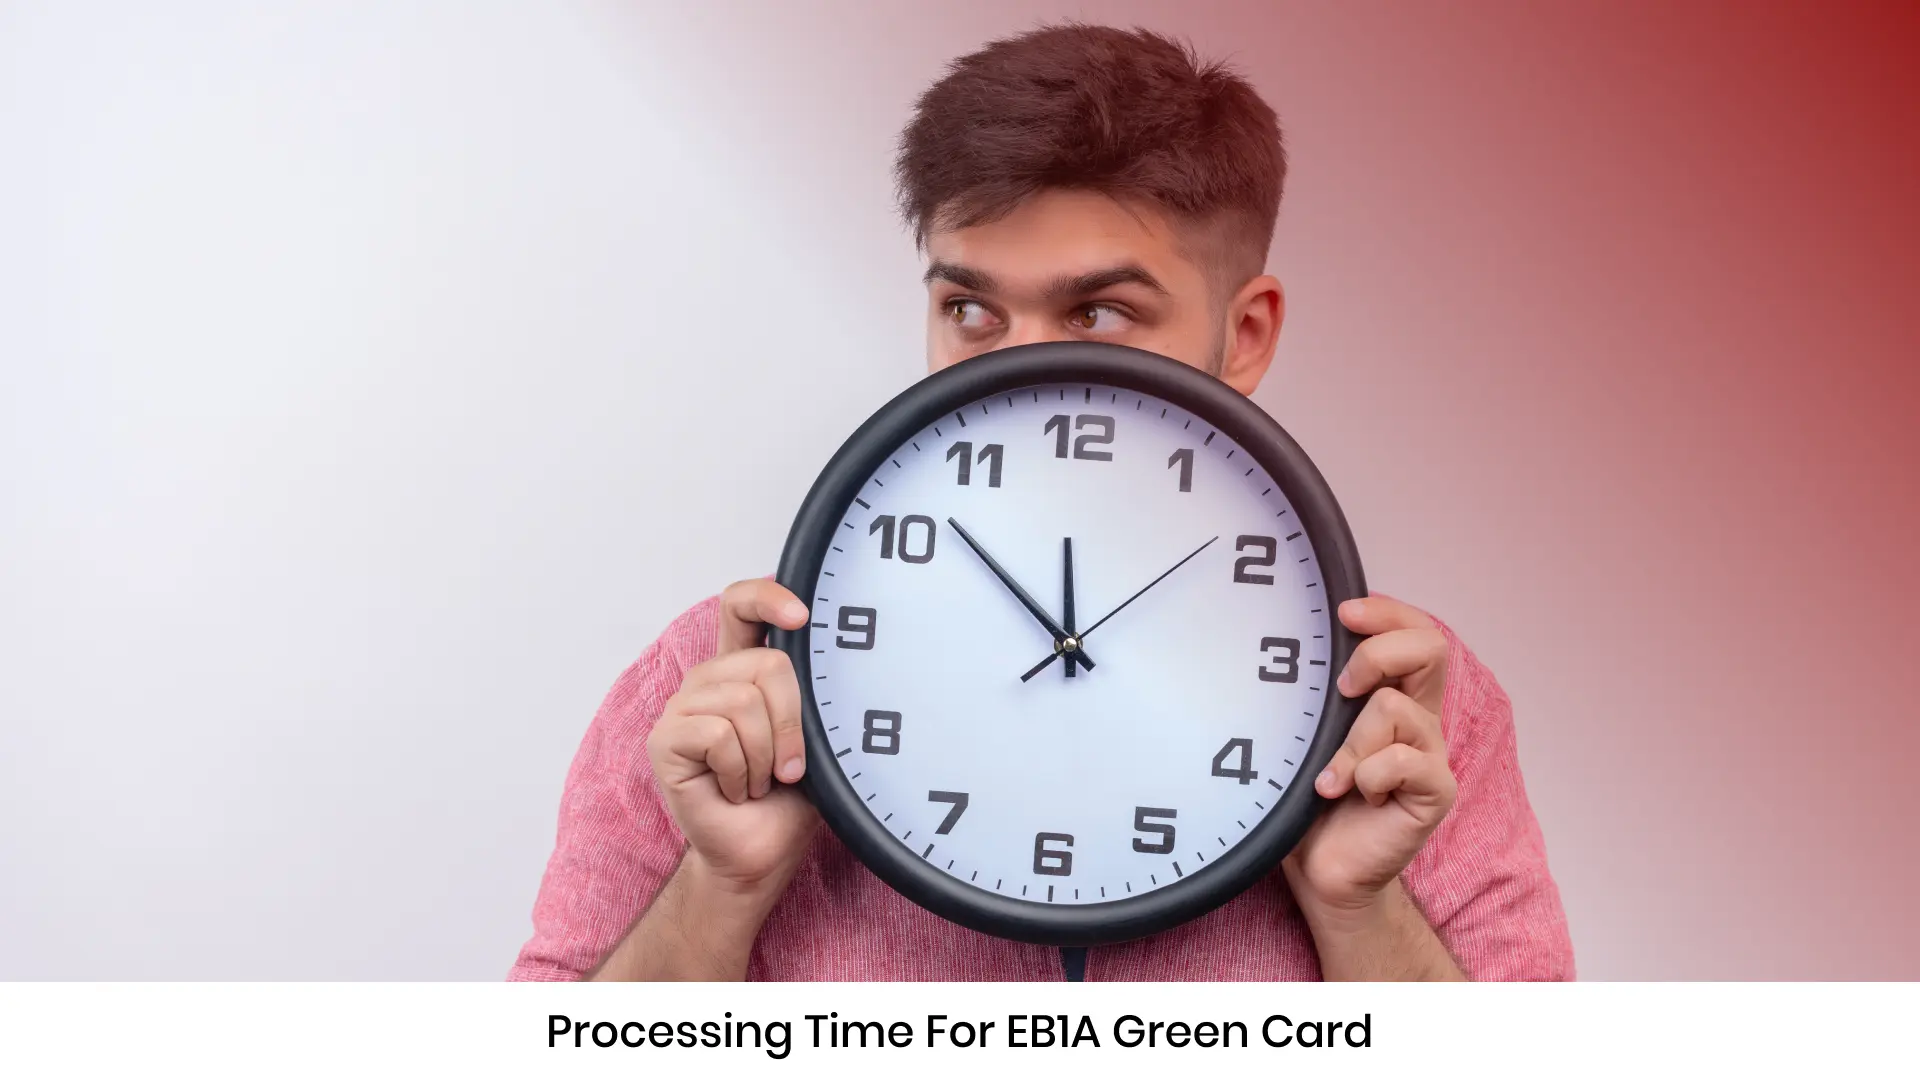 Processing time for EB1A Green Card